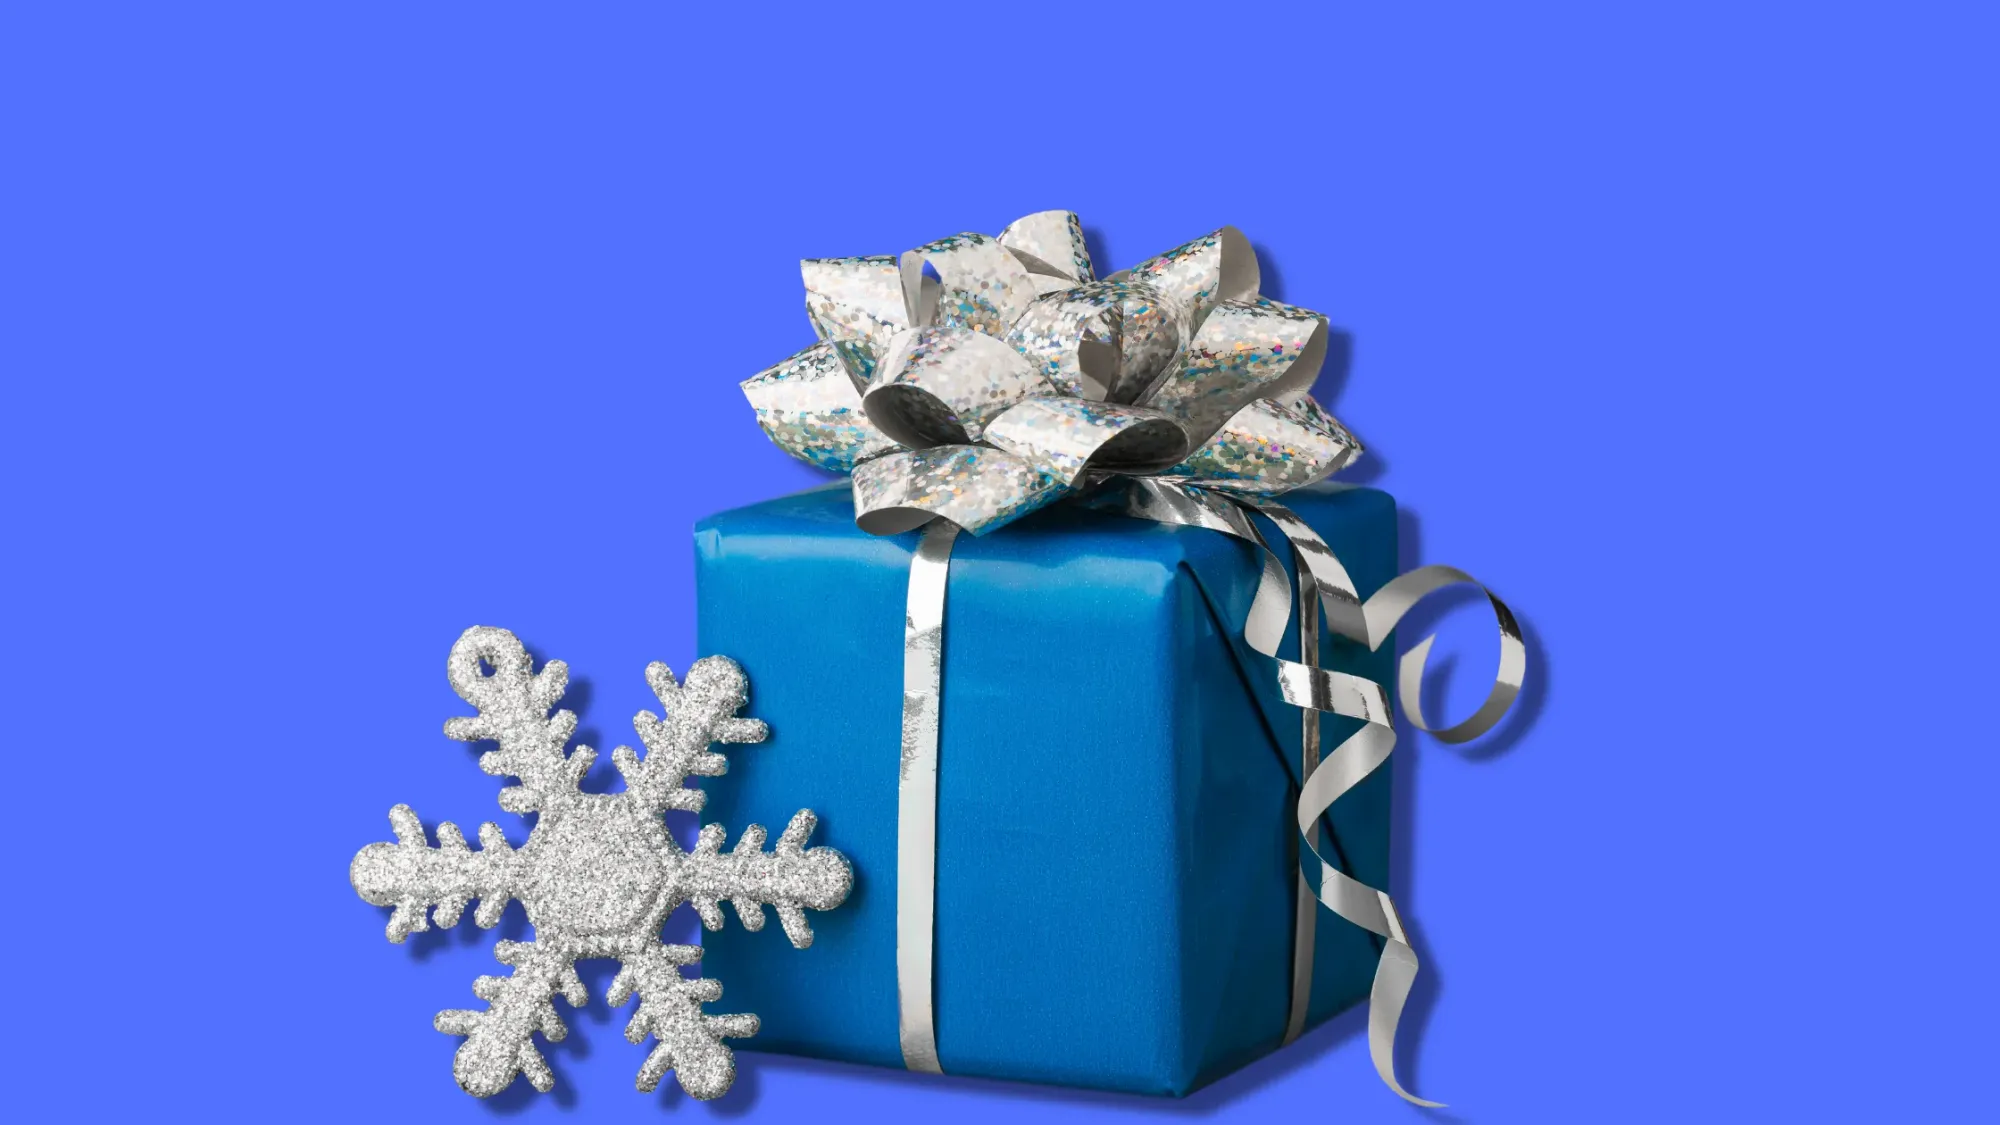 https://blog.empuls.io/es/content/images/2022/12/Christmas-Gifts-for-Bosses---Managers.webp